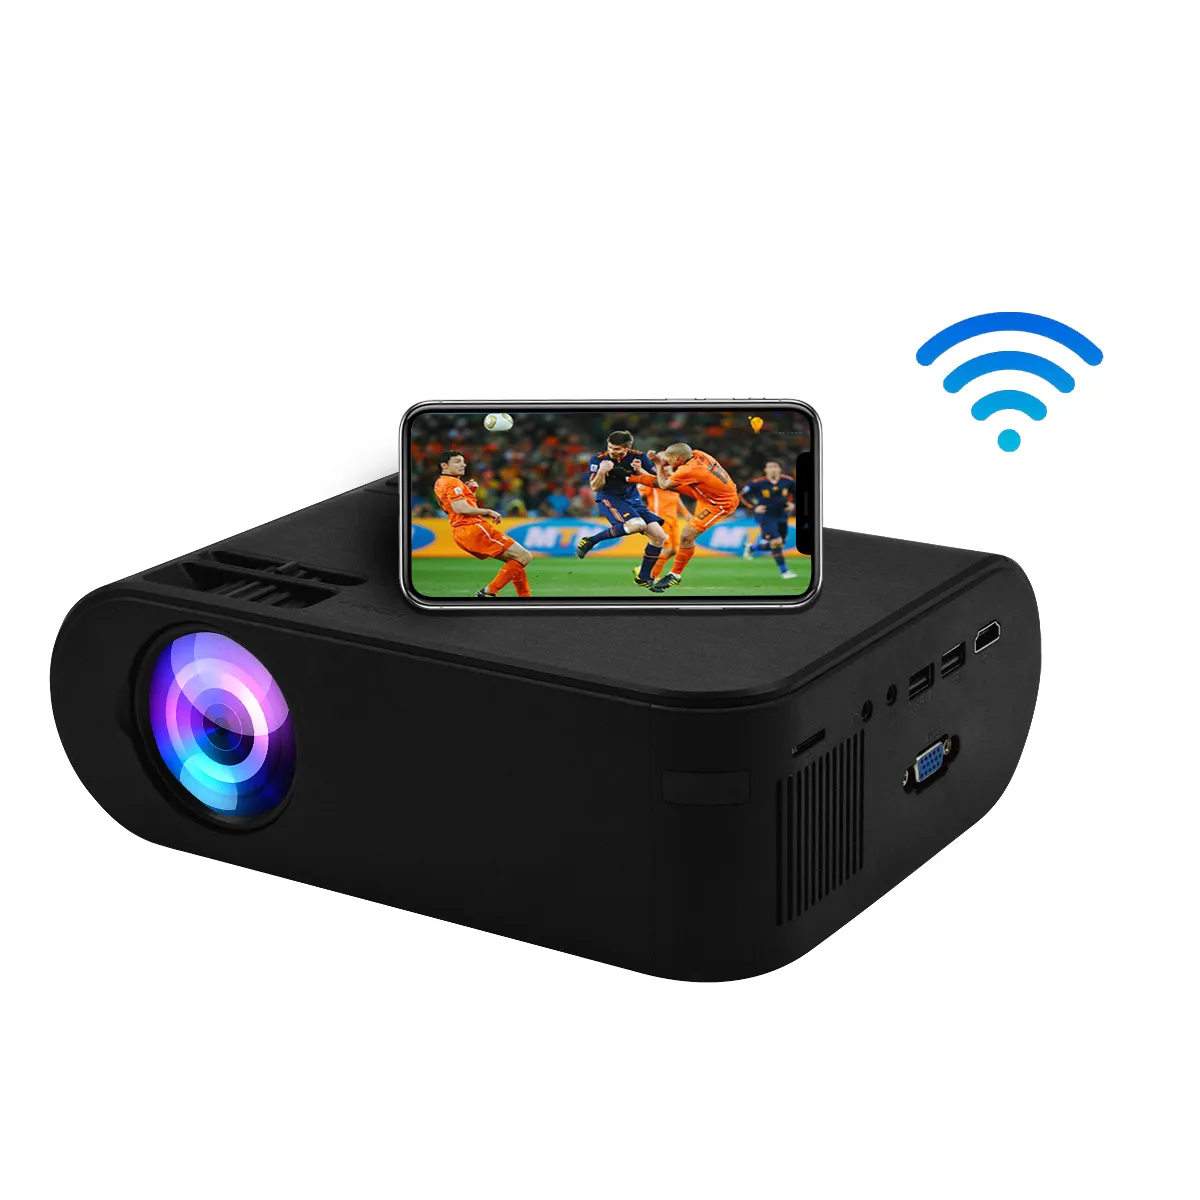 Native HD projector An21 plus max support 1080p with screen mirror function wifi connect and USB line connect